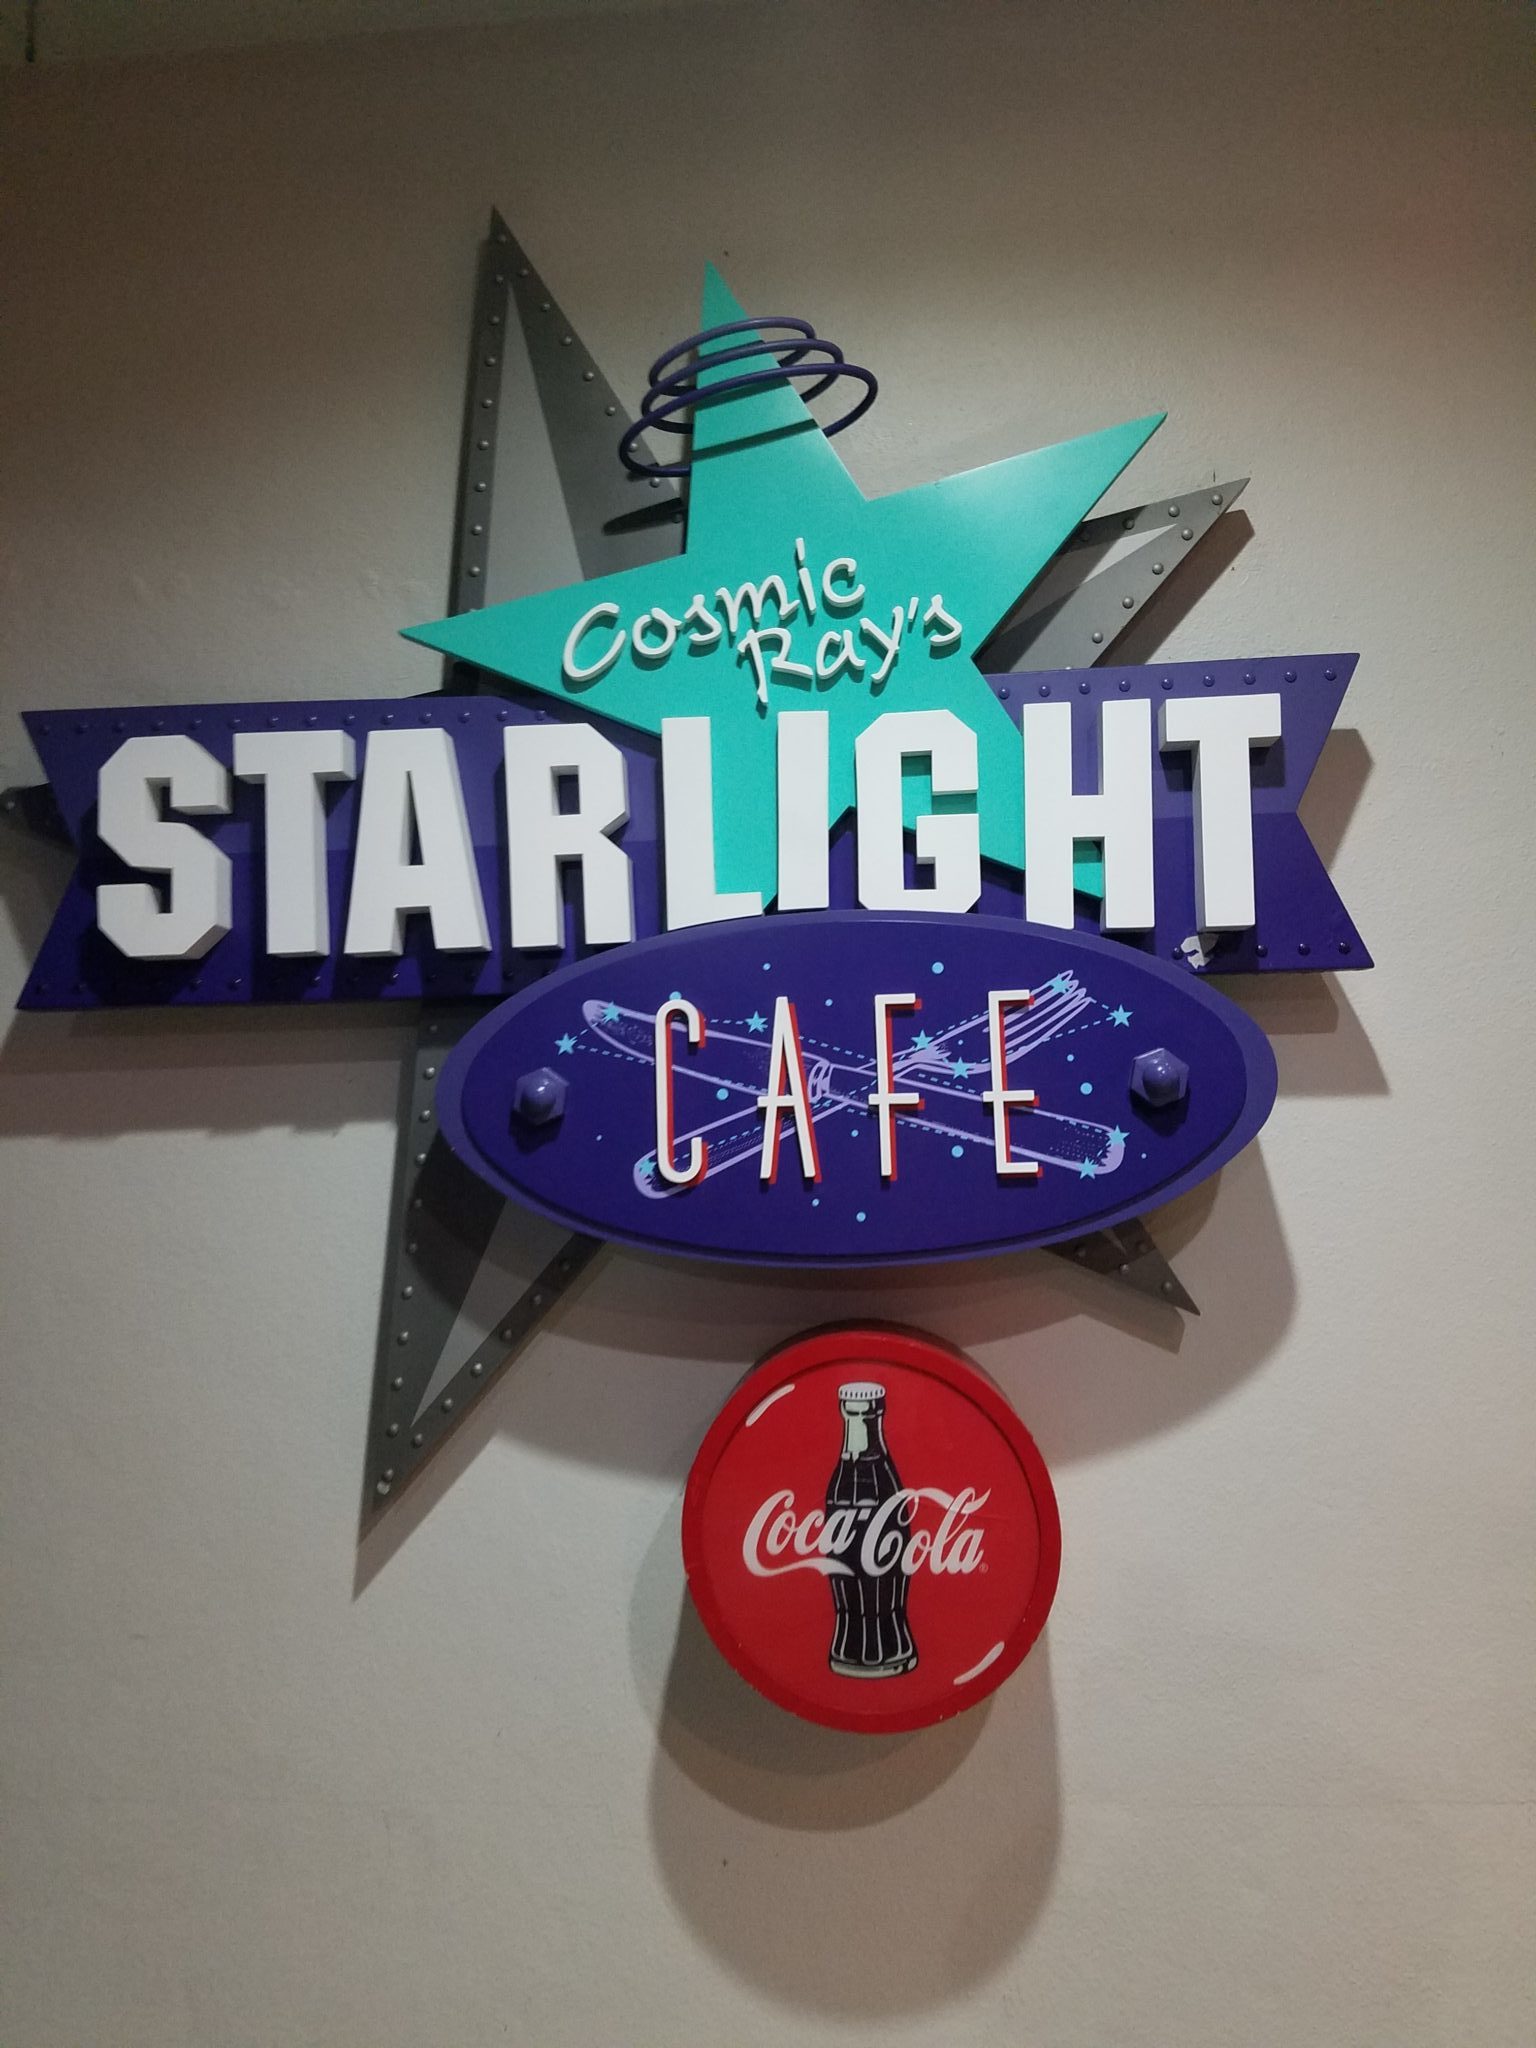 Cosmic Ray’s Starlight Cafe Now Serving Same Menu At All Three Bays